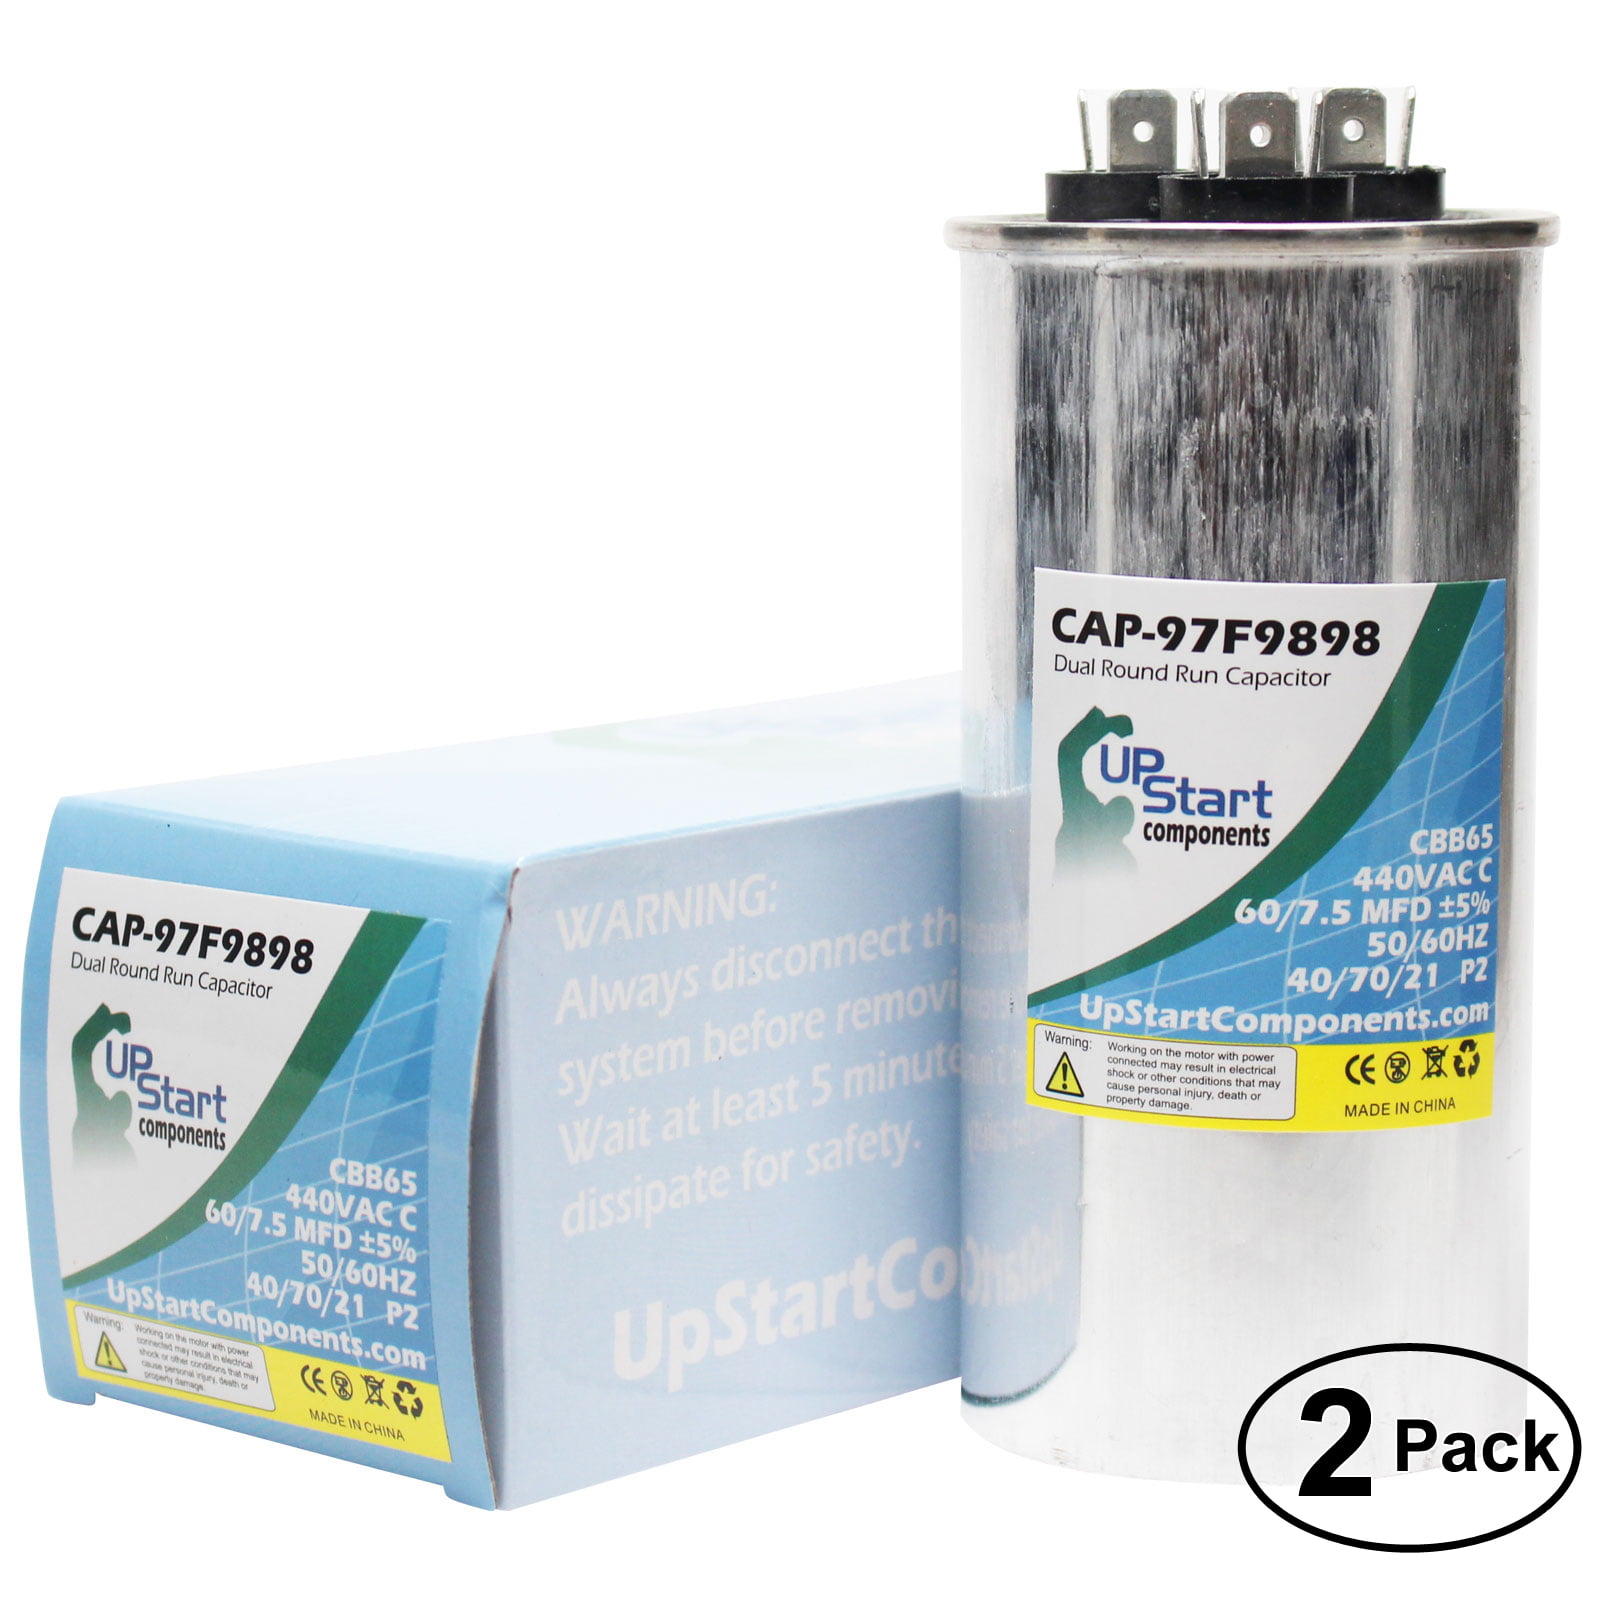 UpStart Components Brand 2-Pack 45/5 MFD 440 Volt Dual Round Run Capacitor Replacement for Carrier HC98KA046 CAP-97F9851